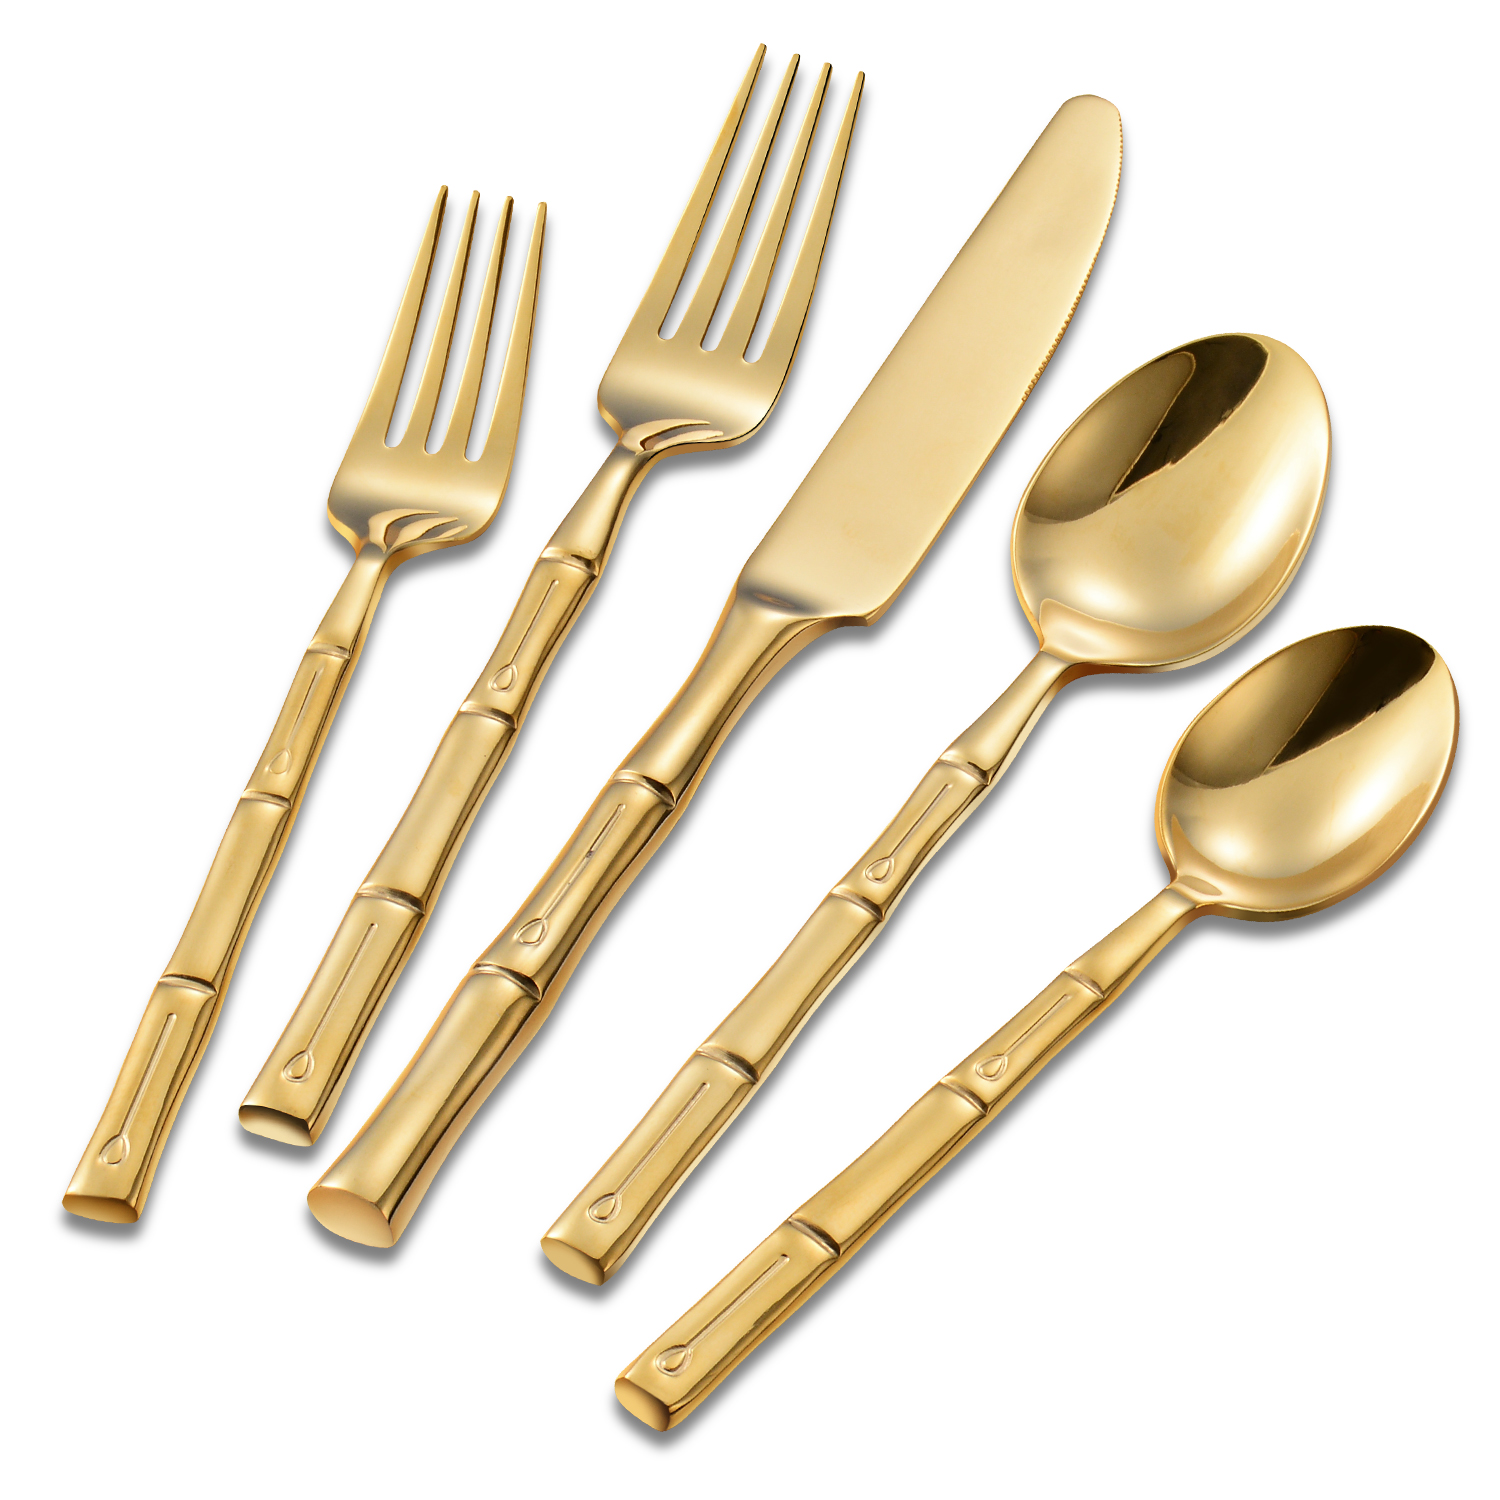 Reasonable price Sterling Silver Flatware Set - Gold Bamboo Shaped Handle Stainless Steel Cutlery Set – Liou